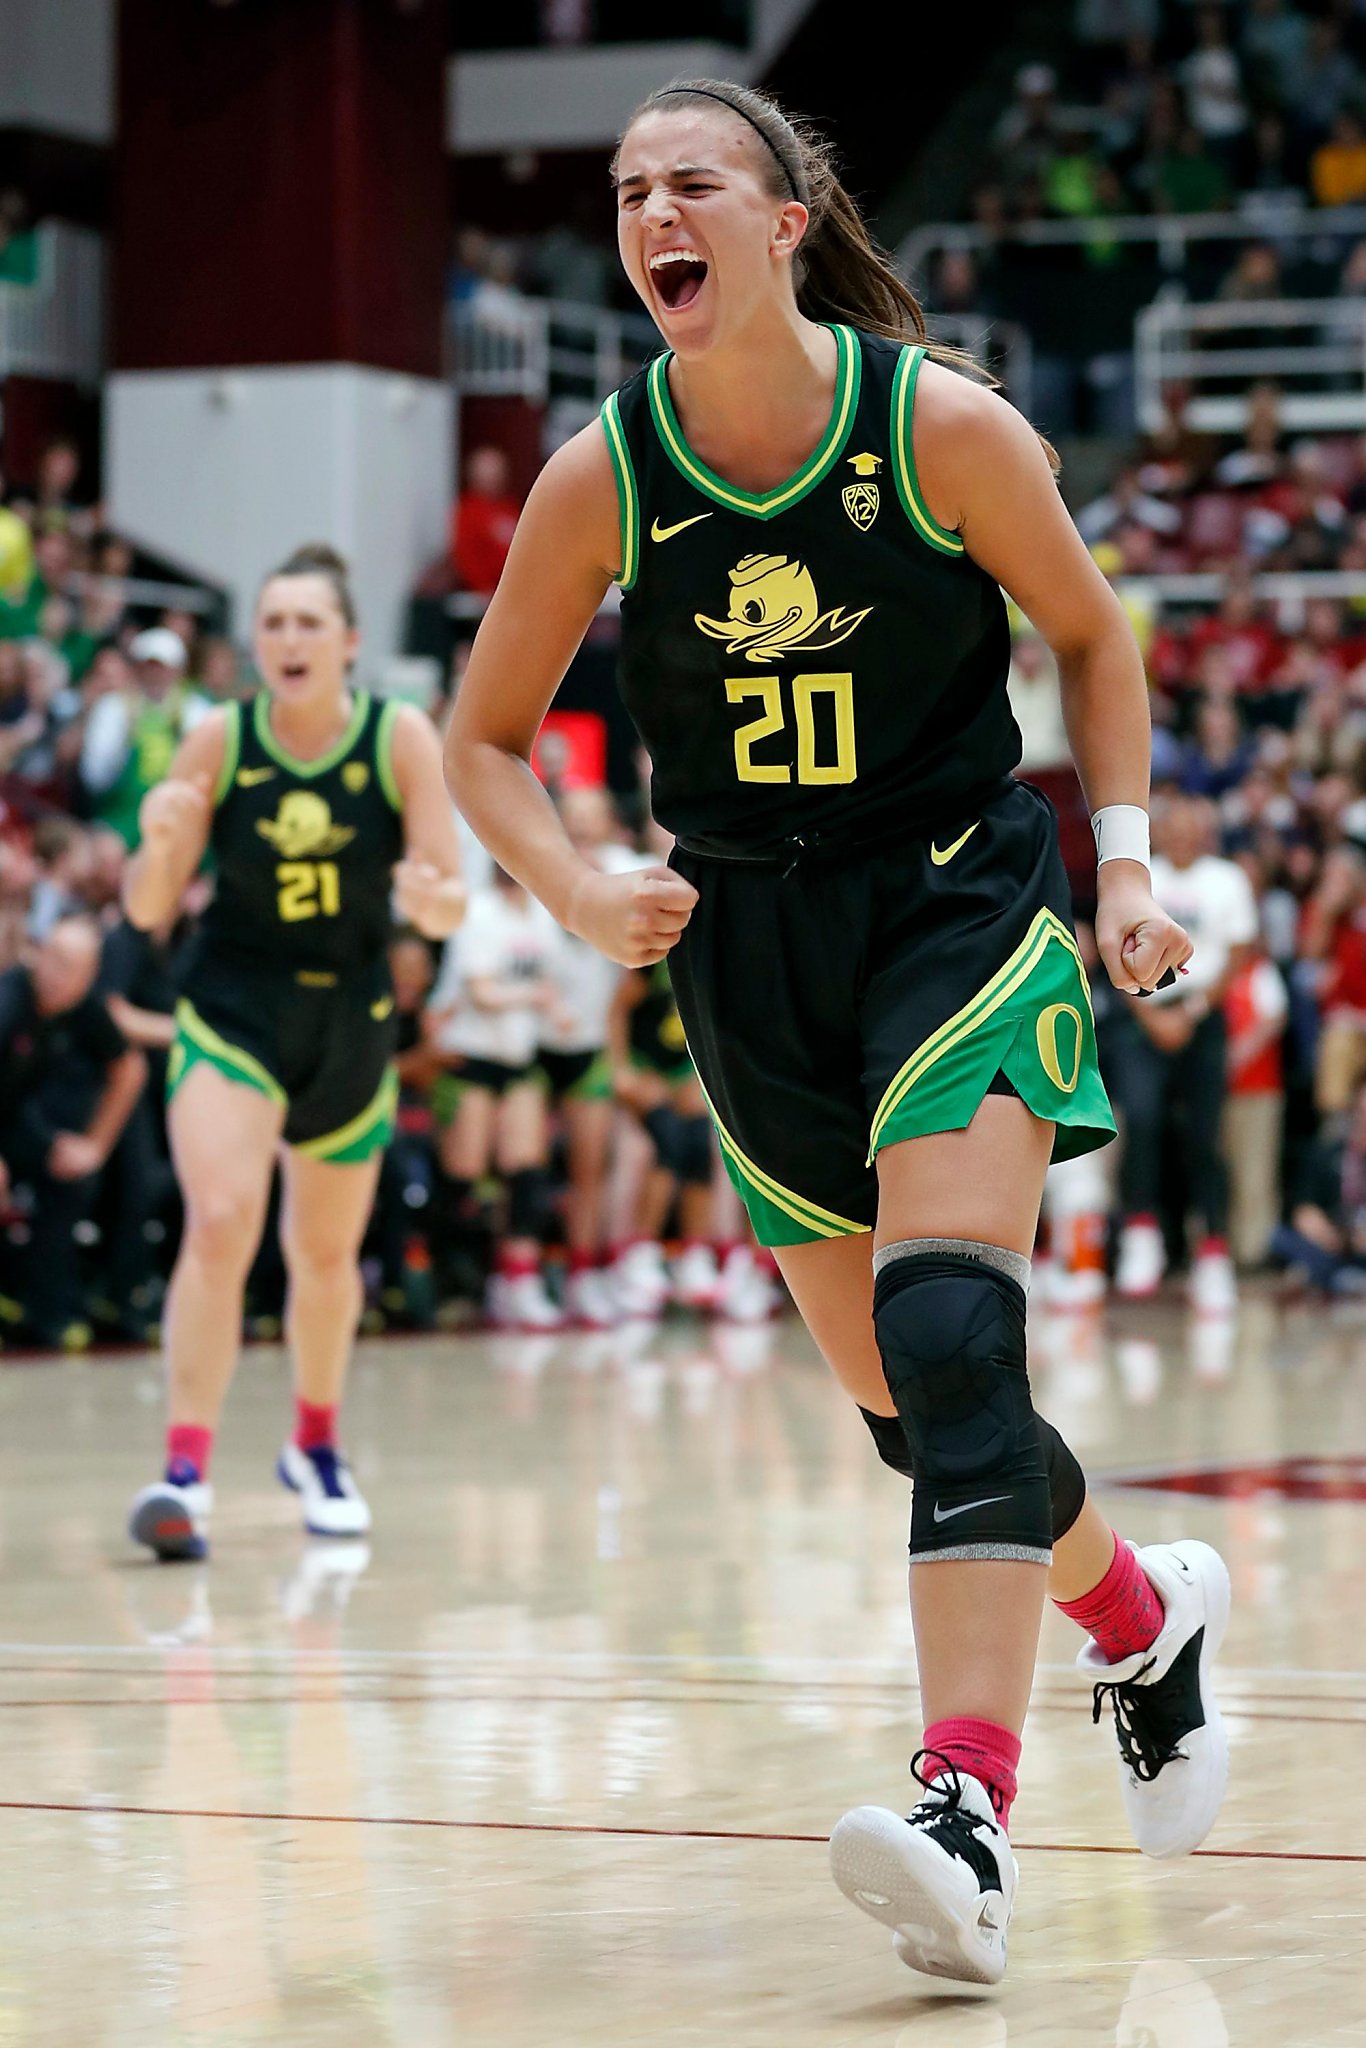 Ionescu hits 20 straight shots for a record 37 points to win the 3